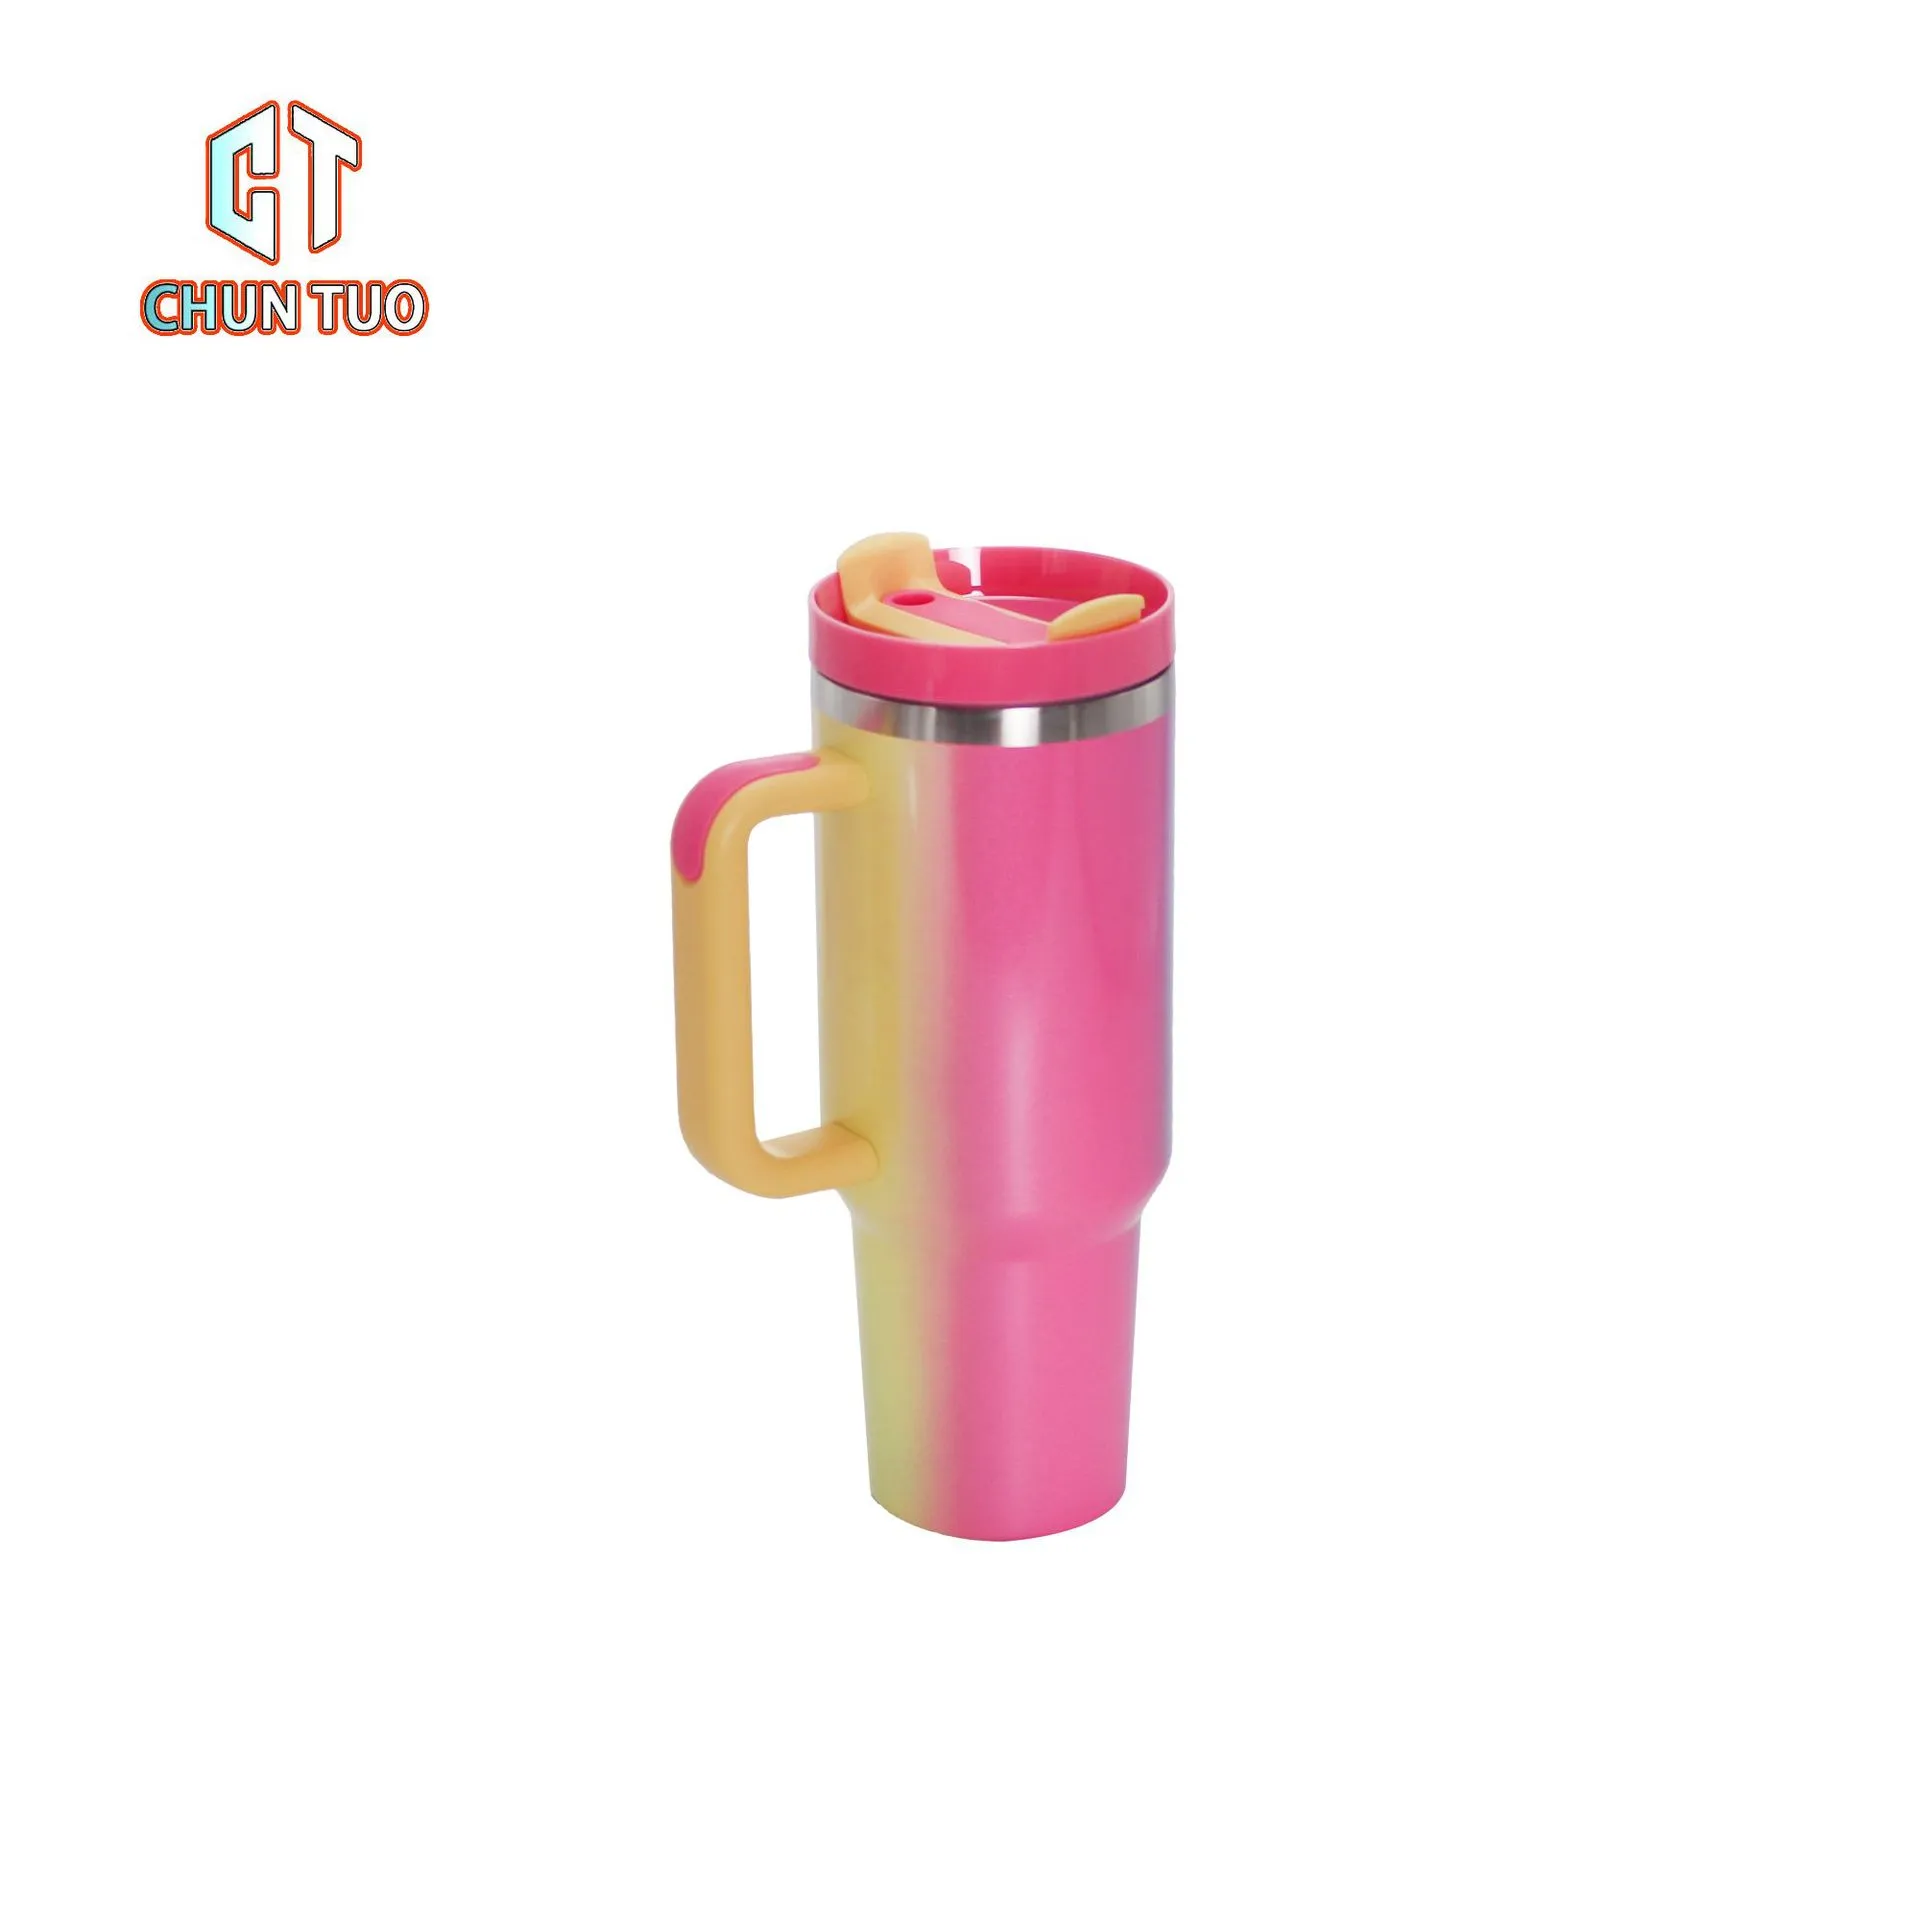 With Logo 40oz Mug Tumbler With Handle Insulated Tumblers Lids Straw Stainless Steel Coffee Termos Cup j;lk 40oz Second generation